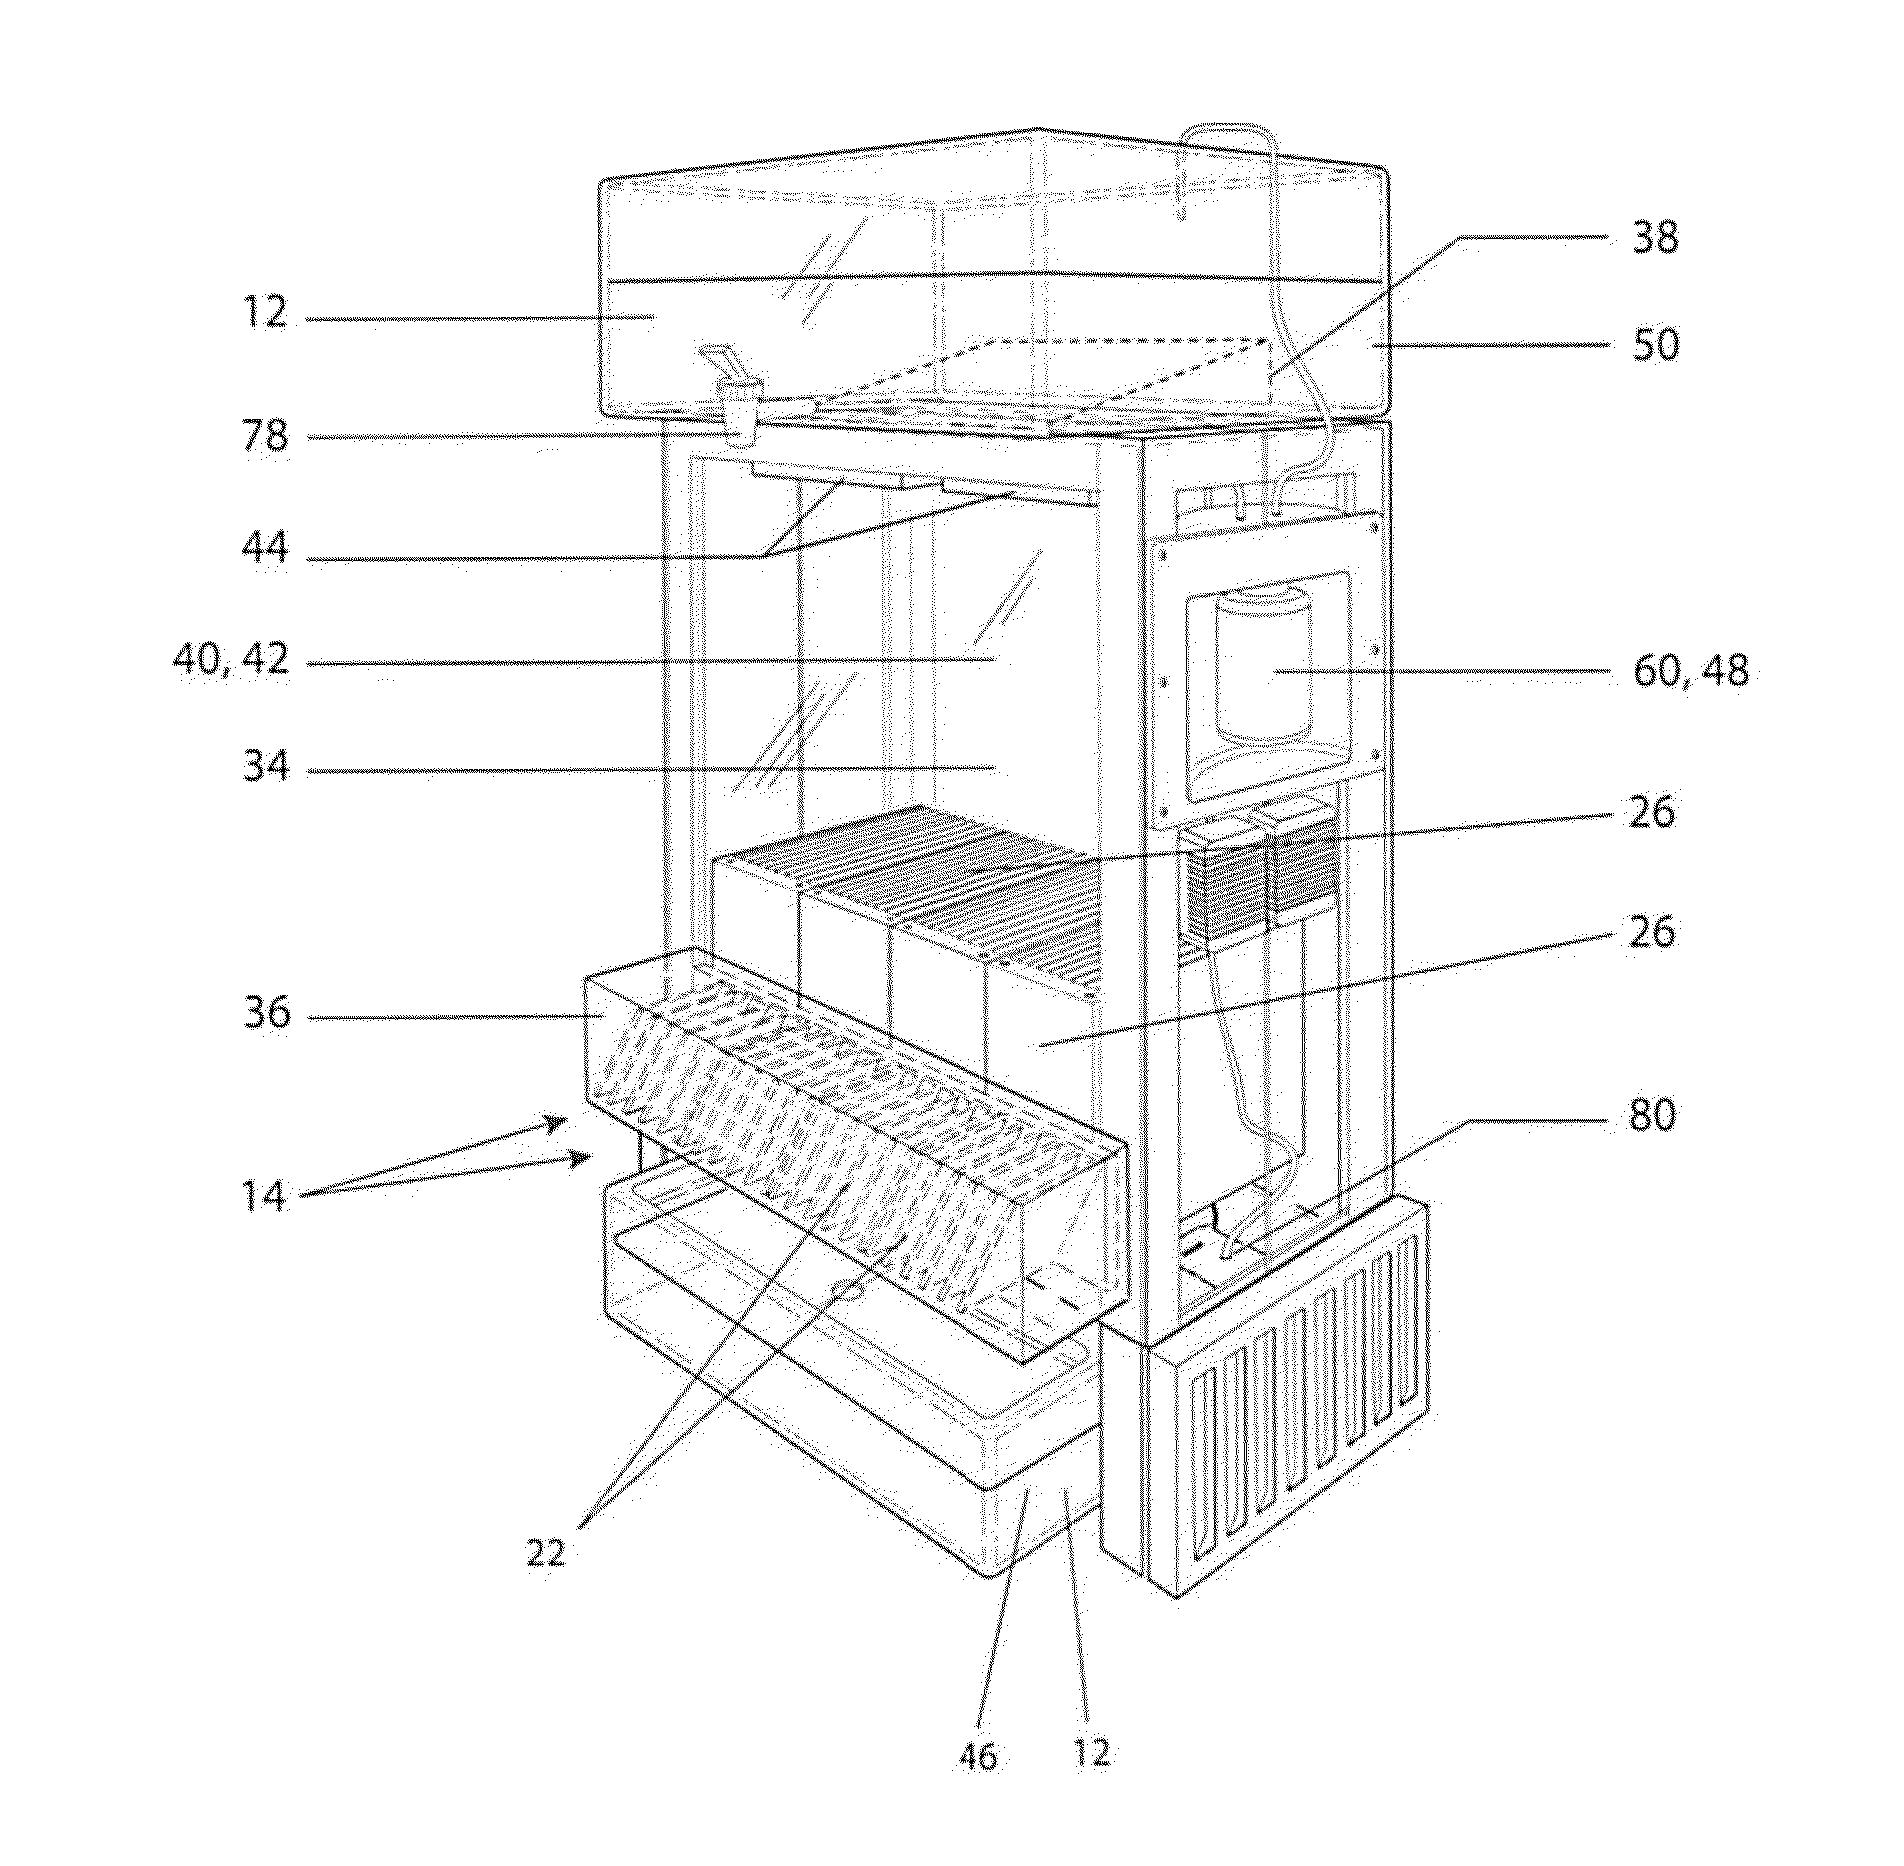 Portable water-generating and filtering apparatus